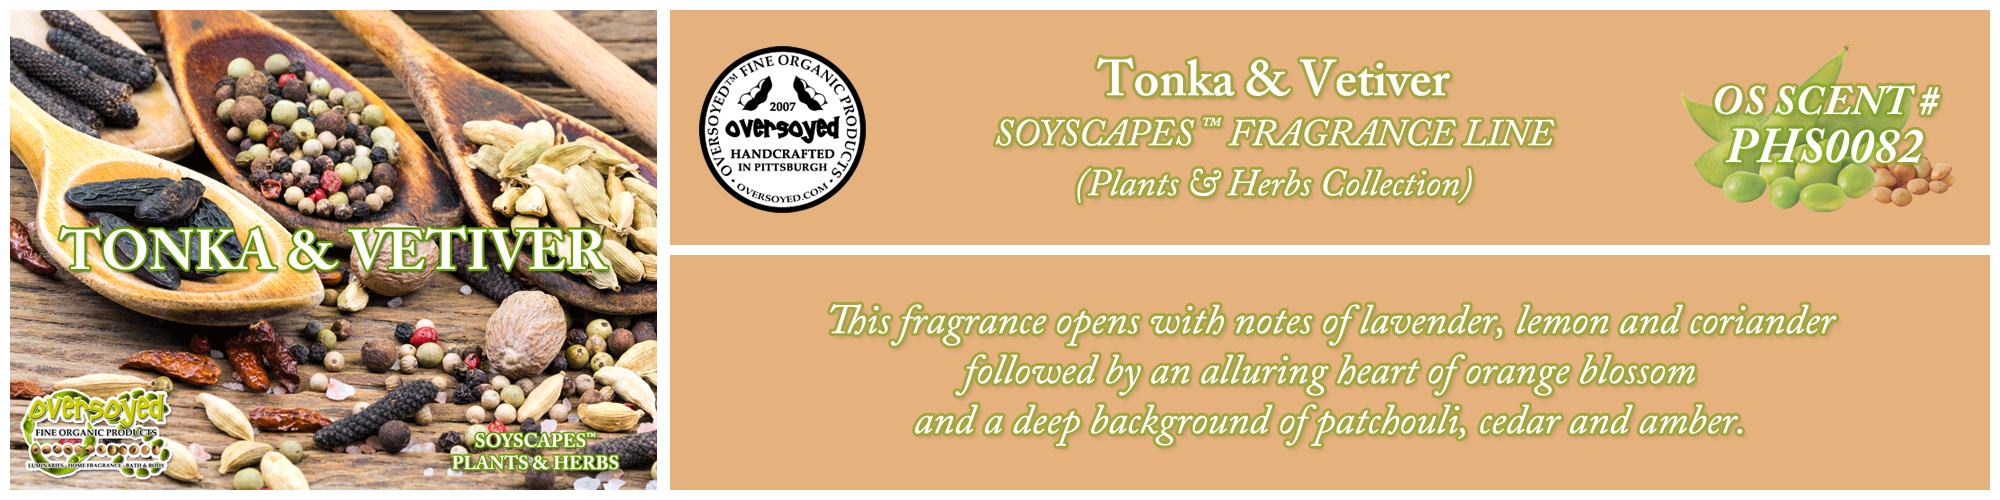 Tonka & Vetiver Handcrafted Products Collection